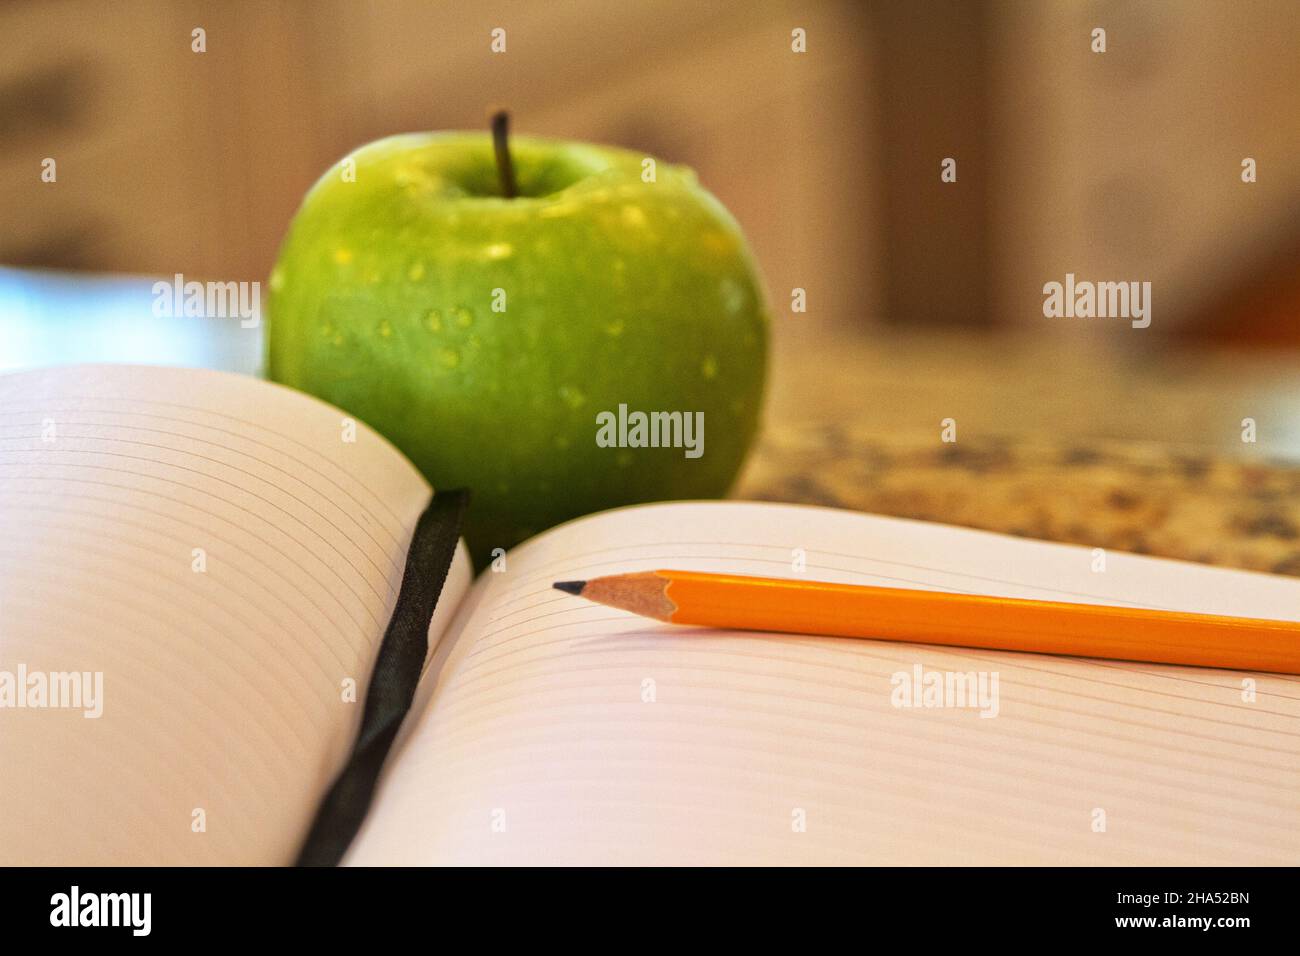 Open journal placed with green apple and journal suggests education, teaching, and learning insights as well as student notes and reflections. Stock Photo